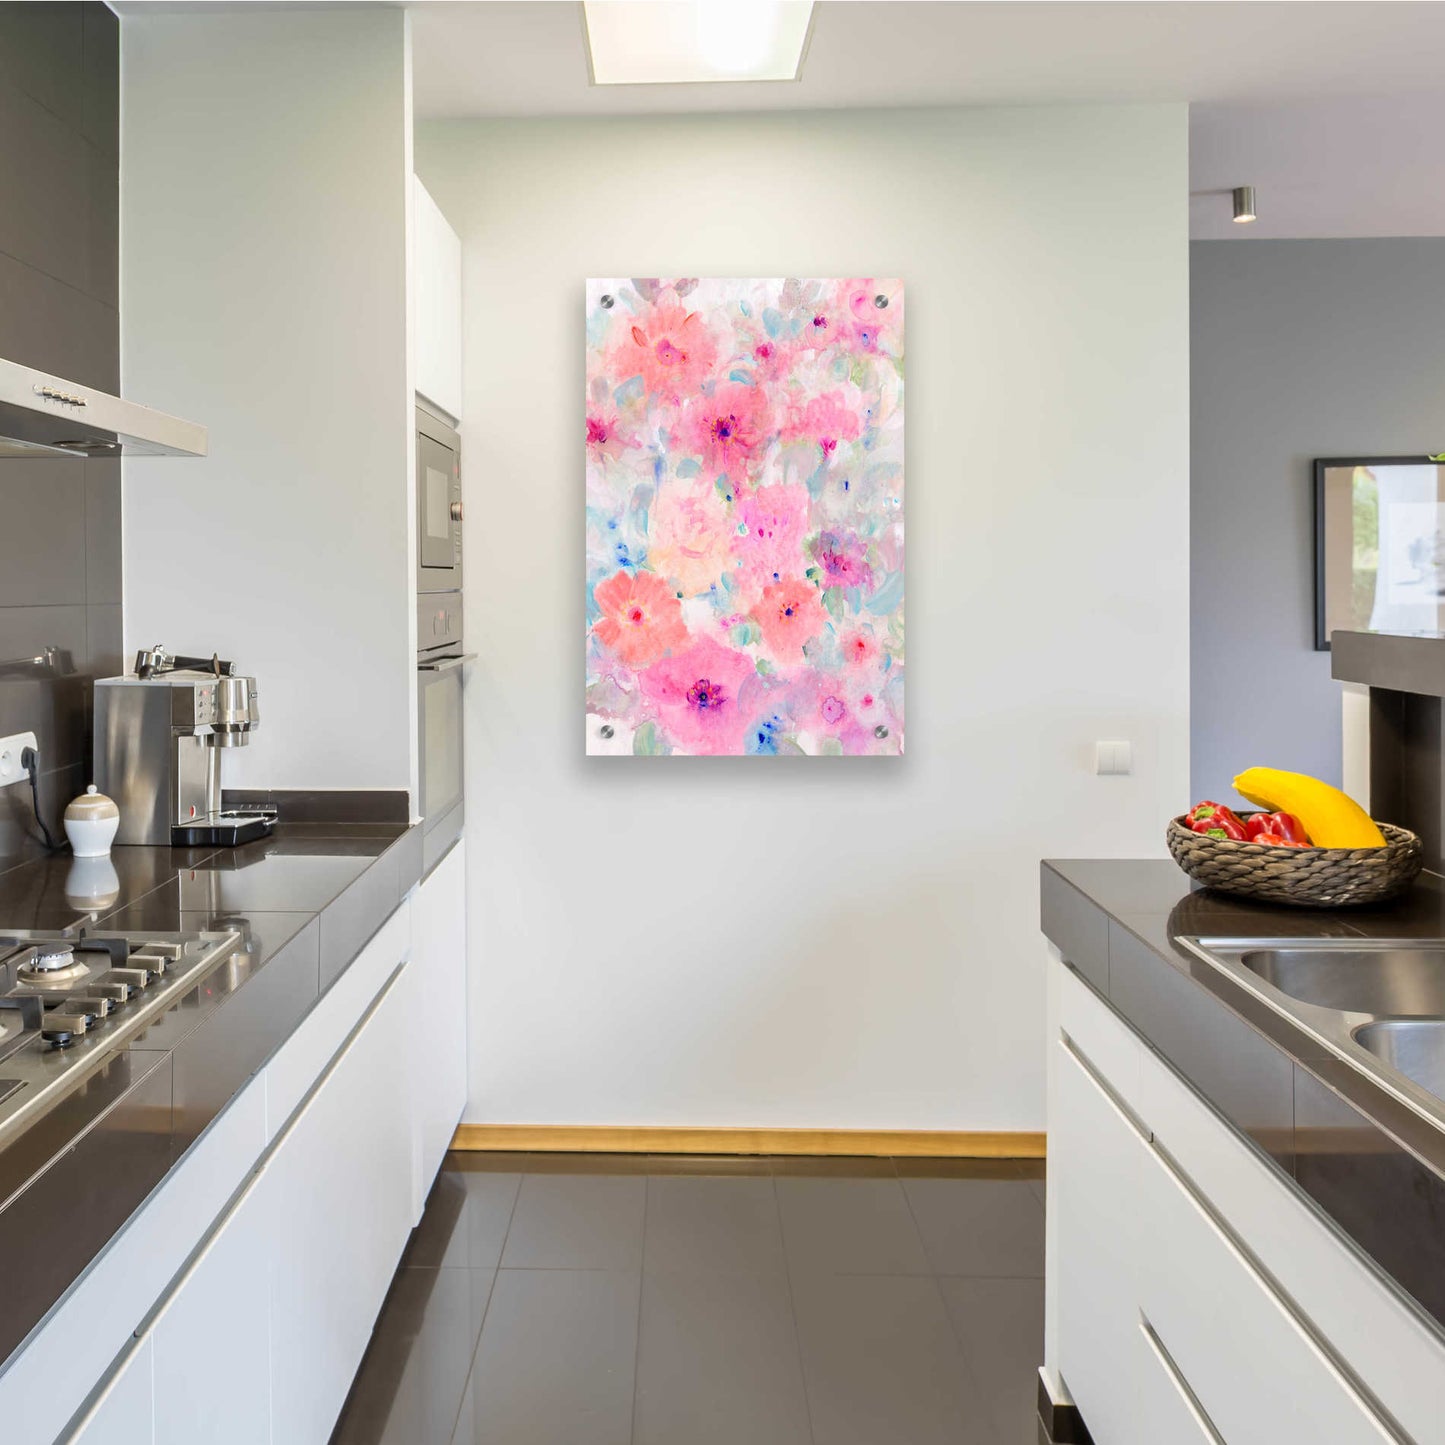 Epic Art 'Bright Floral Design  I' by Tim O'Toole, Acrylic Glass Wall Art,24x36